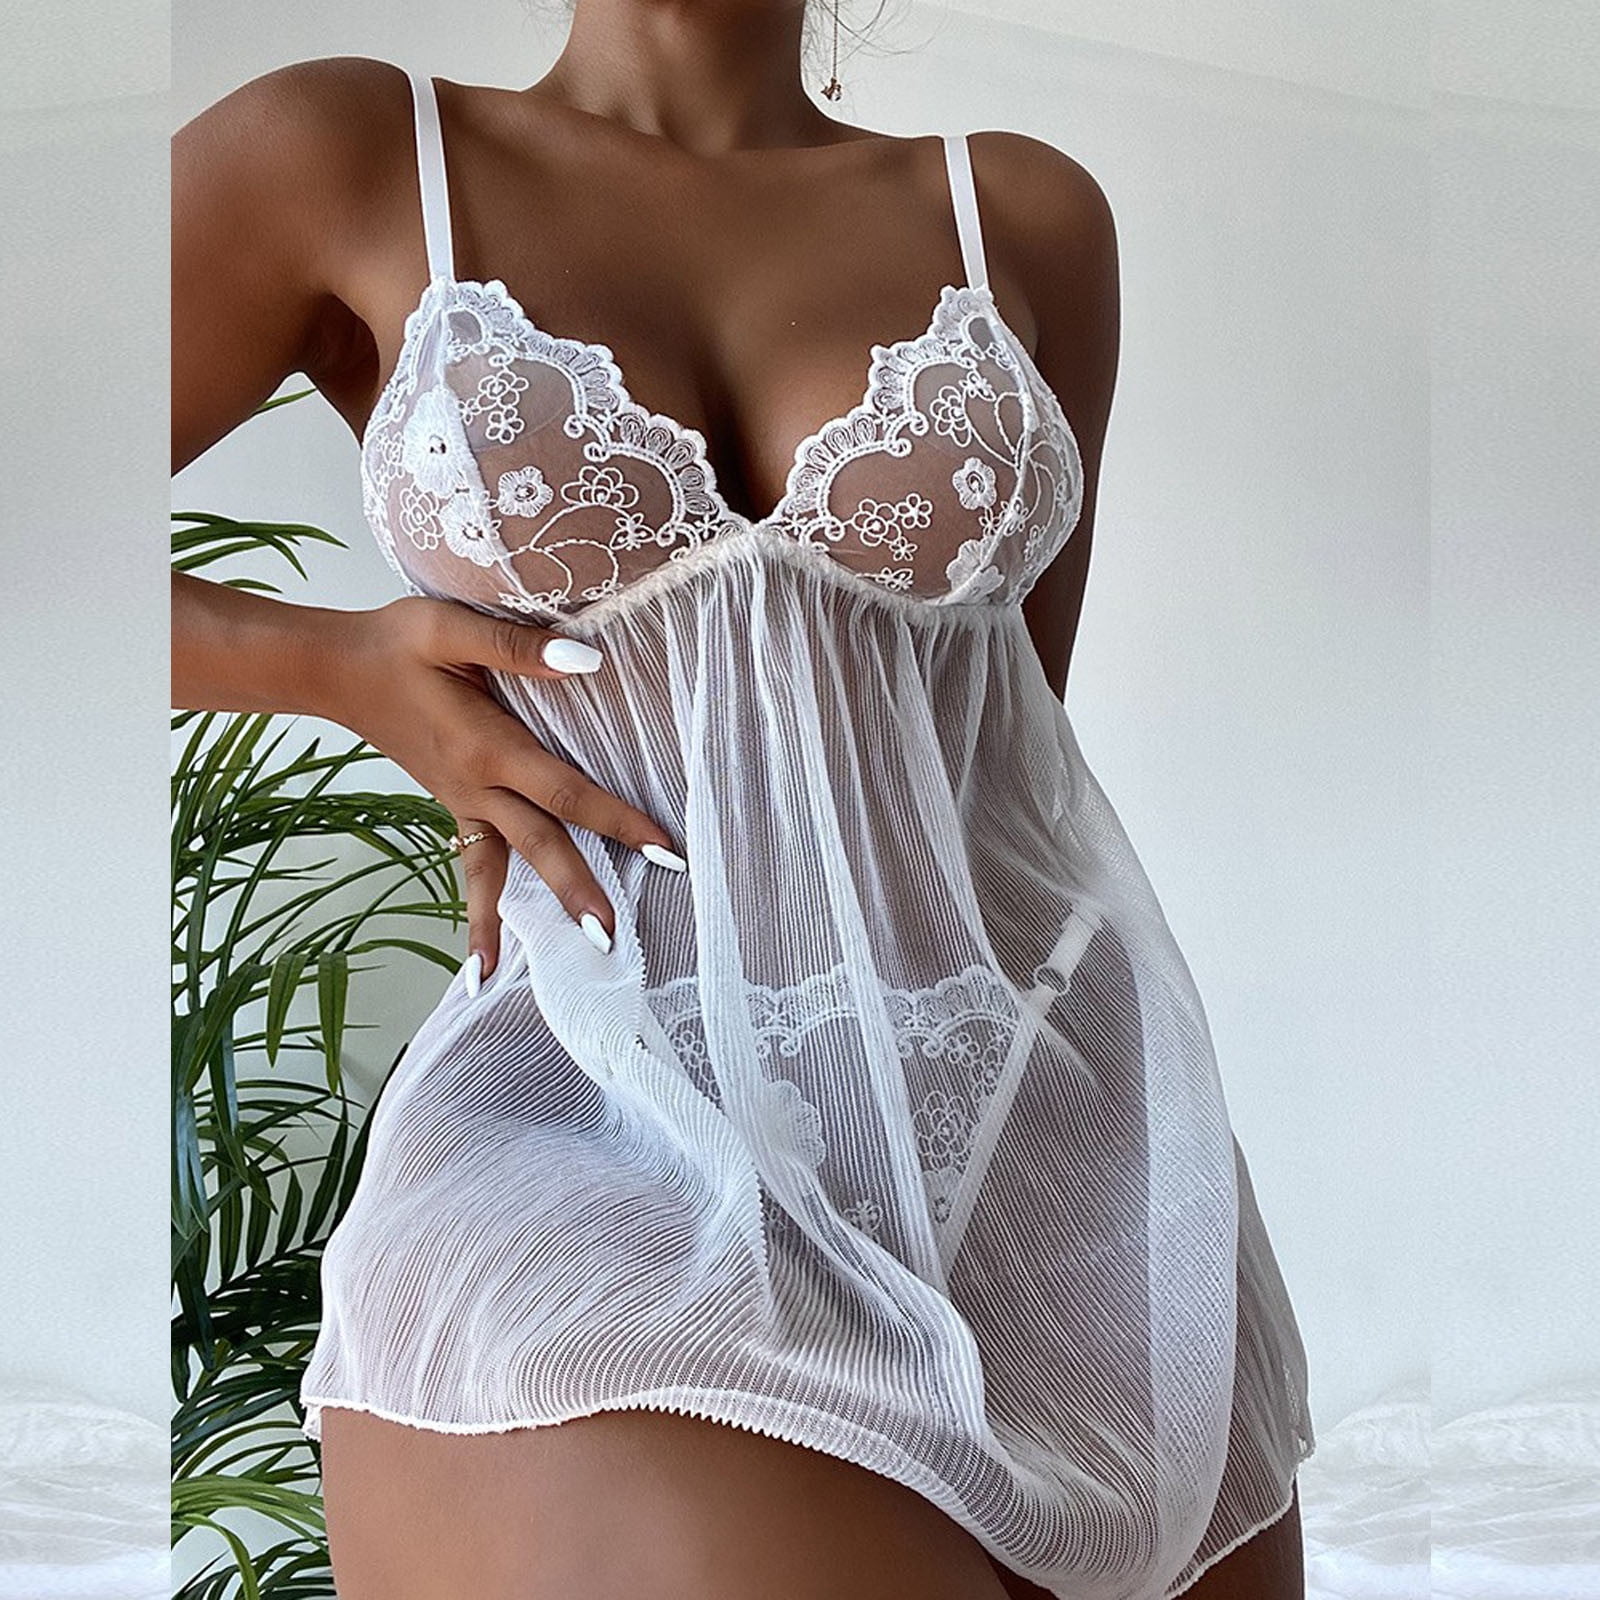 Sexy White Lace See Through Babydoll Lingerie Set